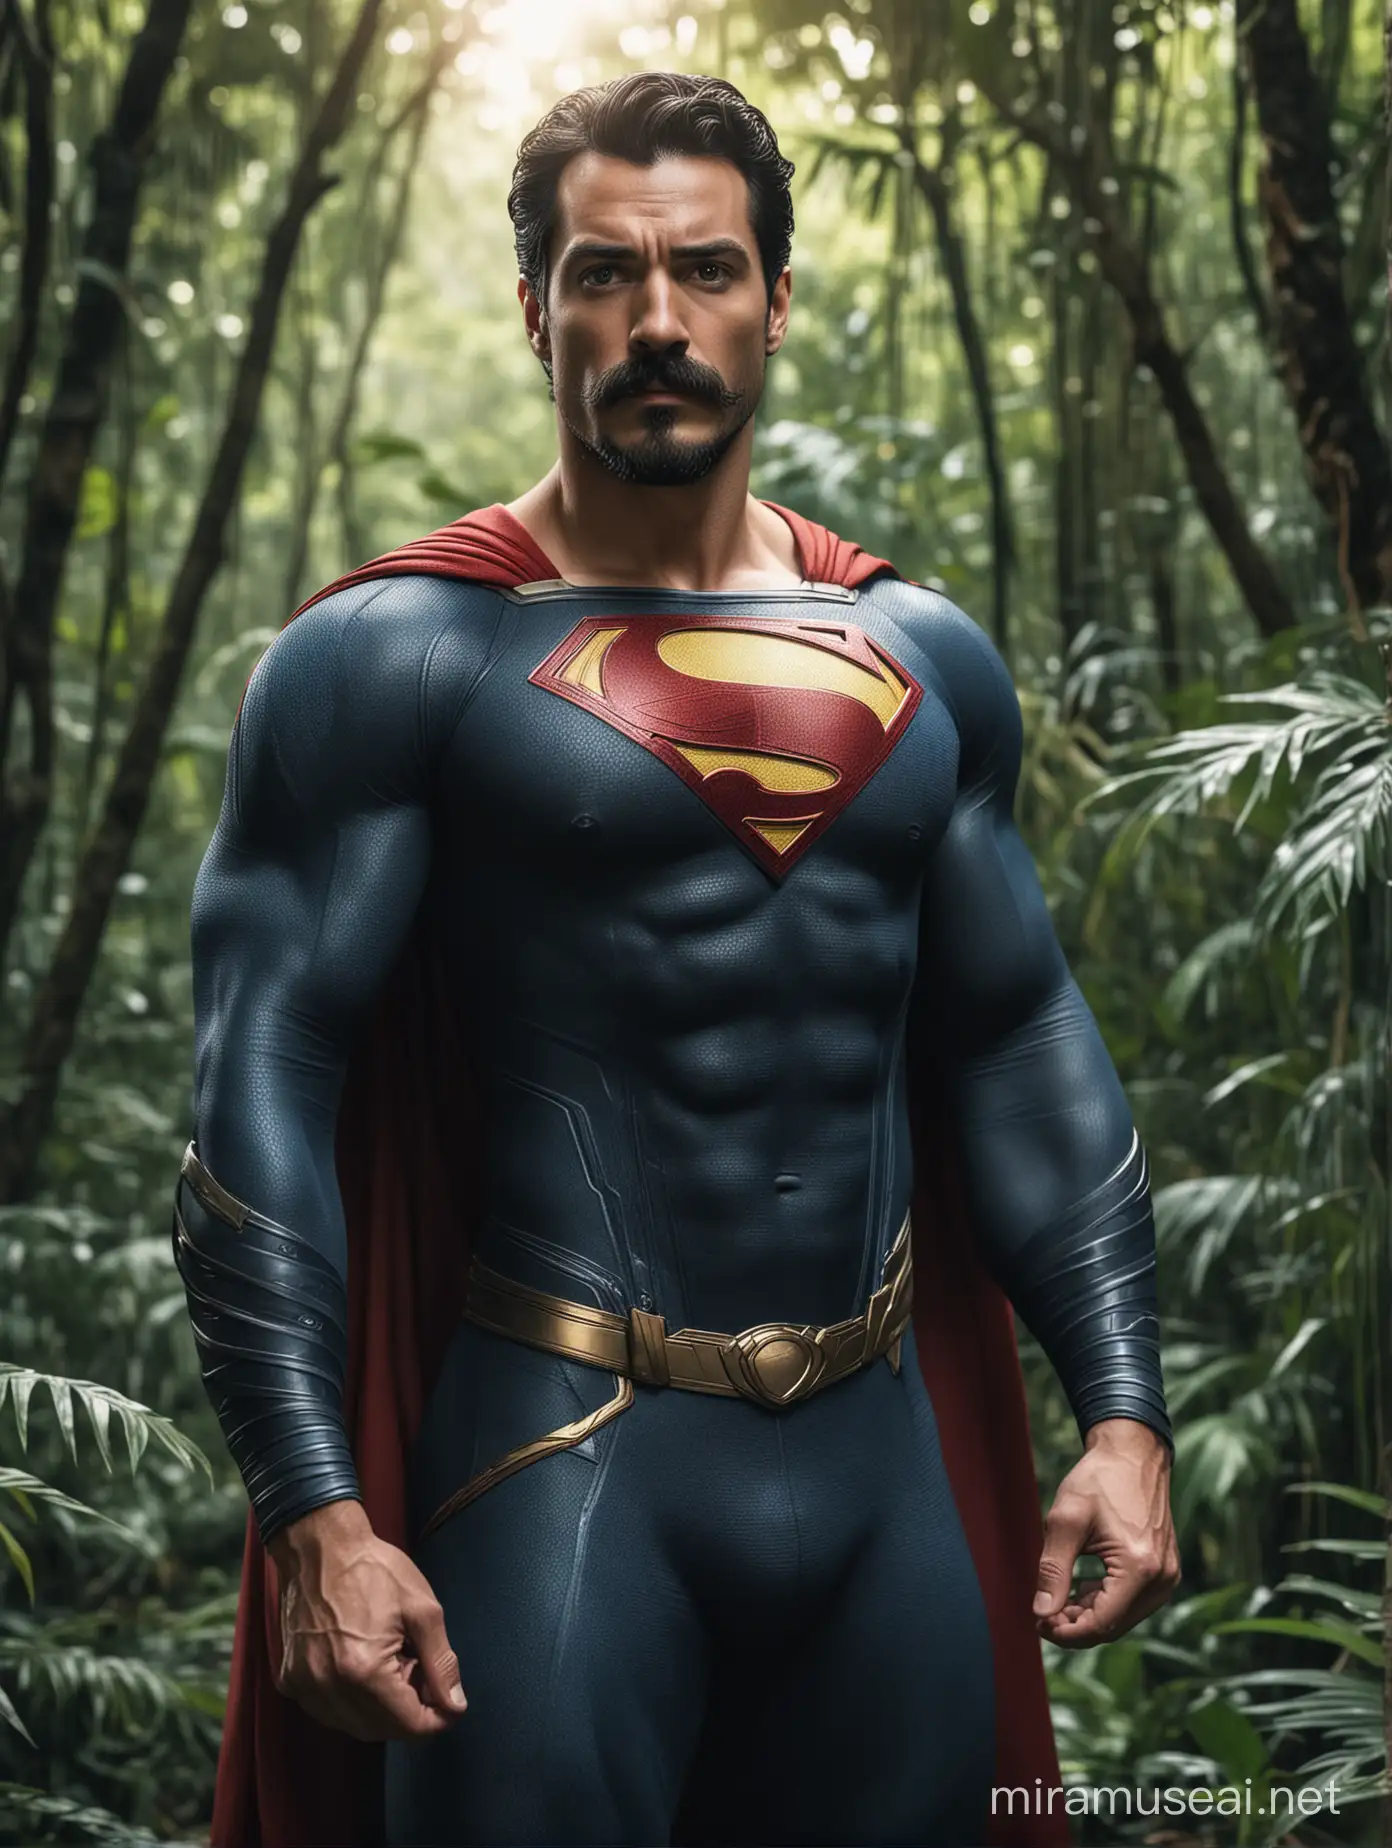 Powerful Superman with Beard and Mustache Stands Tall in Lush Jungle